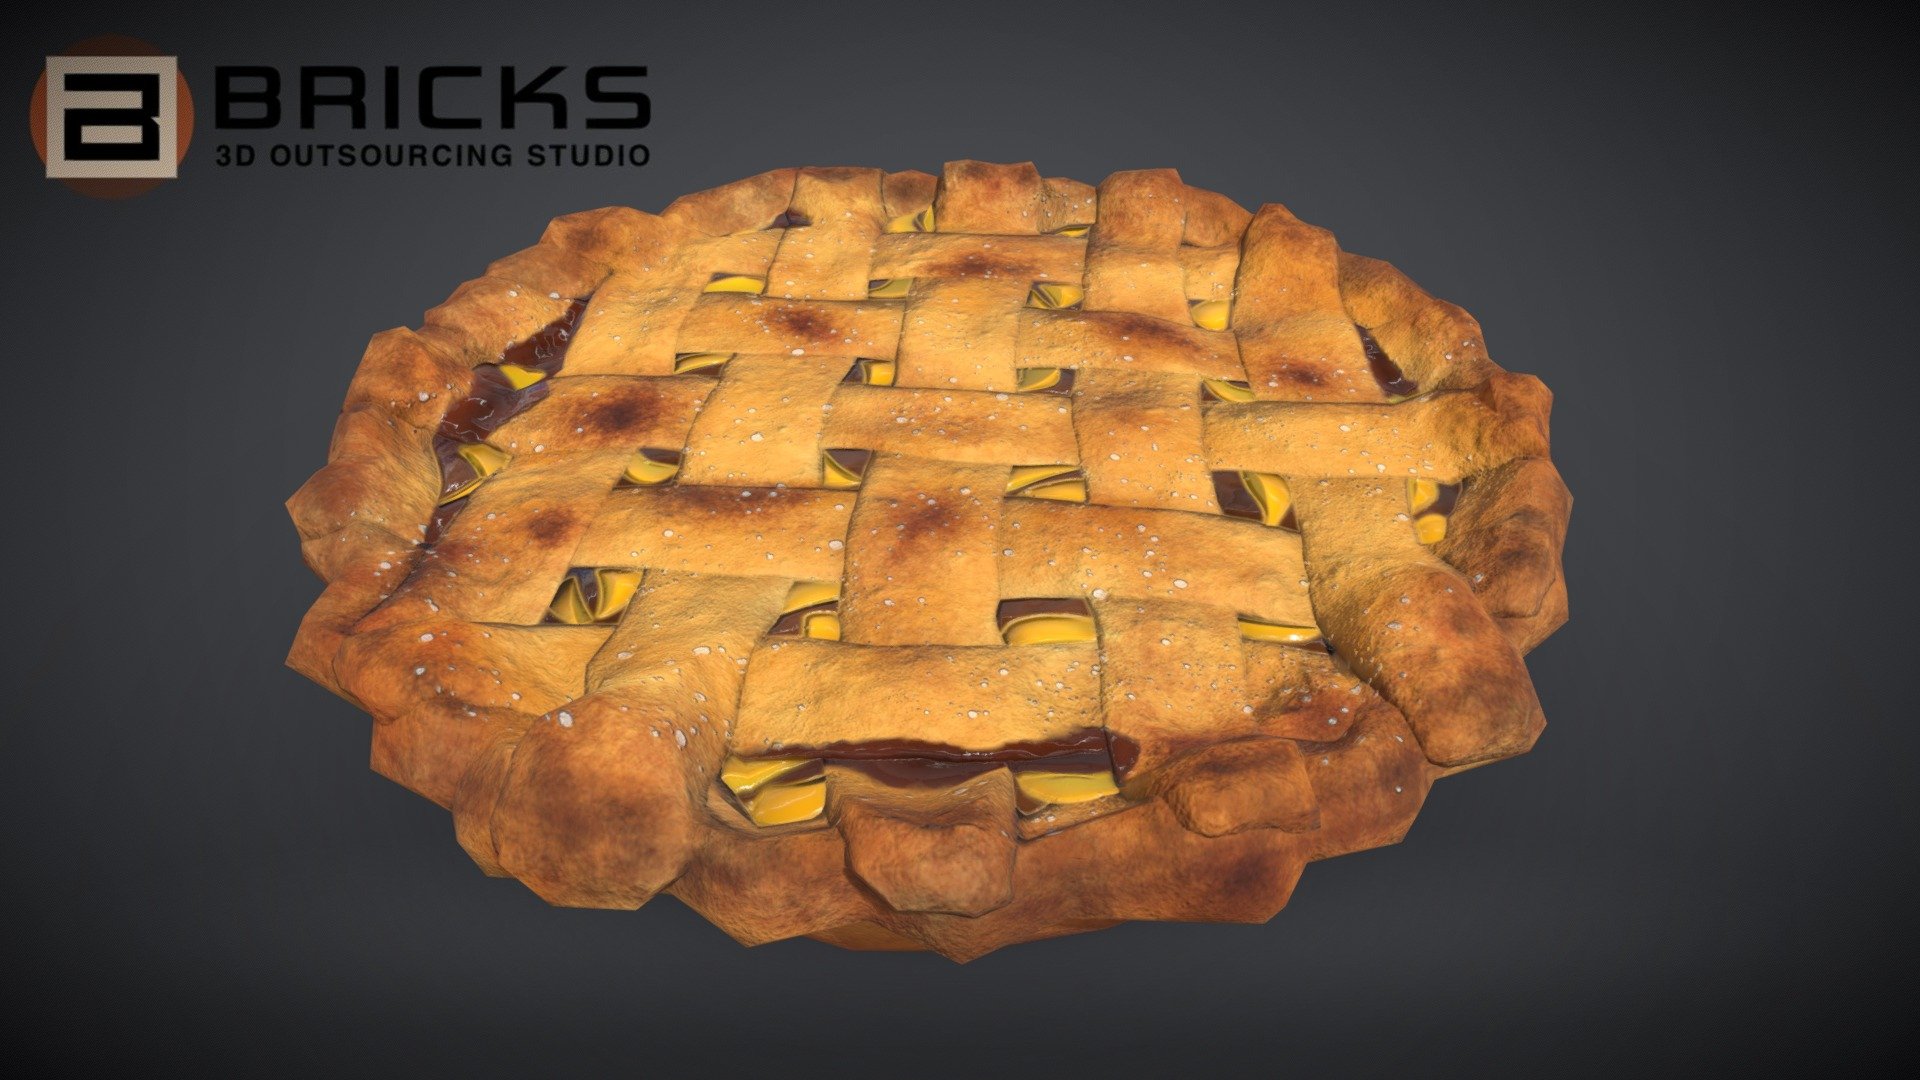 PBR Food Asset:
Peach Pie
Polycount: 1600
Vertex count: 802
Texture Size: 2048px x 2048px
Normal: OpenGL

If you need any adjust in file please contact us: team@bricks3dstudio.com

Hire us: tringuyen@bricks3dstudio.com
Here is us: https://www.bricks3dstudio.com/
        https://www.artstation.com/bricksstudio
        https://www.facebook.com/Bricks3dstudio/
        https://www.linkedin.com/in/bricks-studio-b10462252/ - Peach Pie - Buy Royalty Free 3D model by Bricks Studio (@bricks3dstudio) 3d model